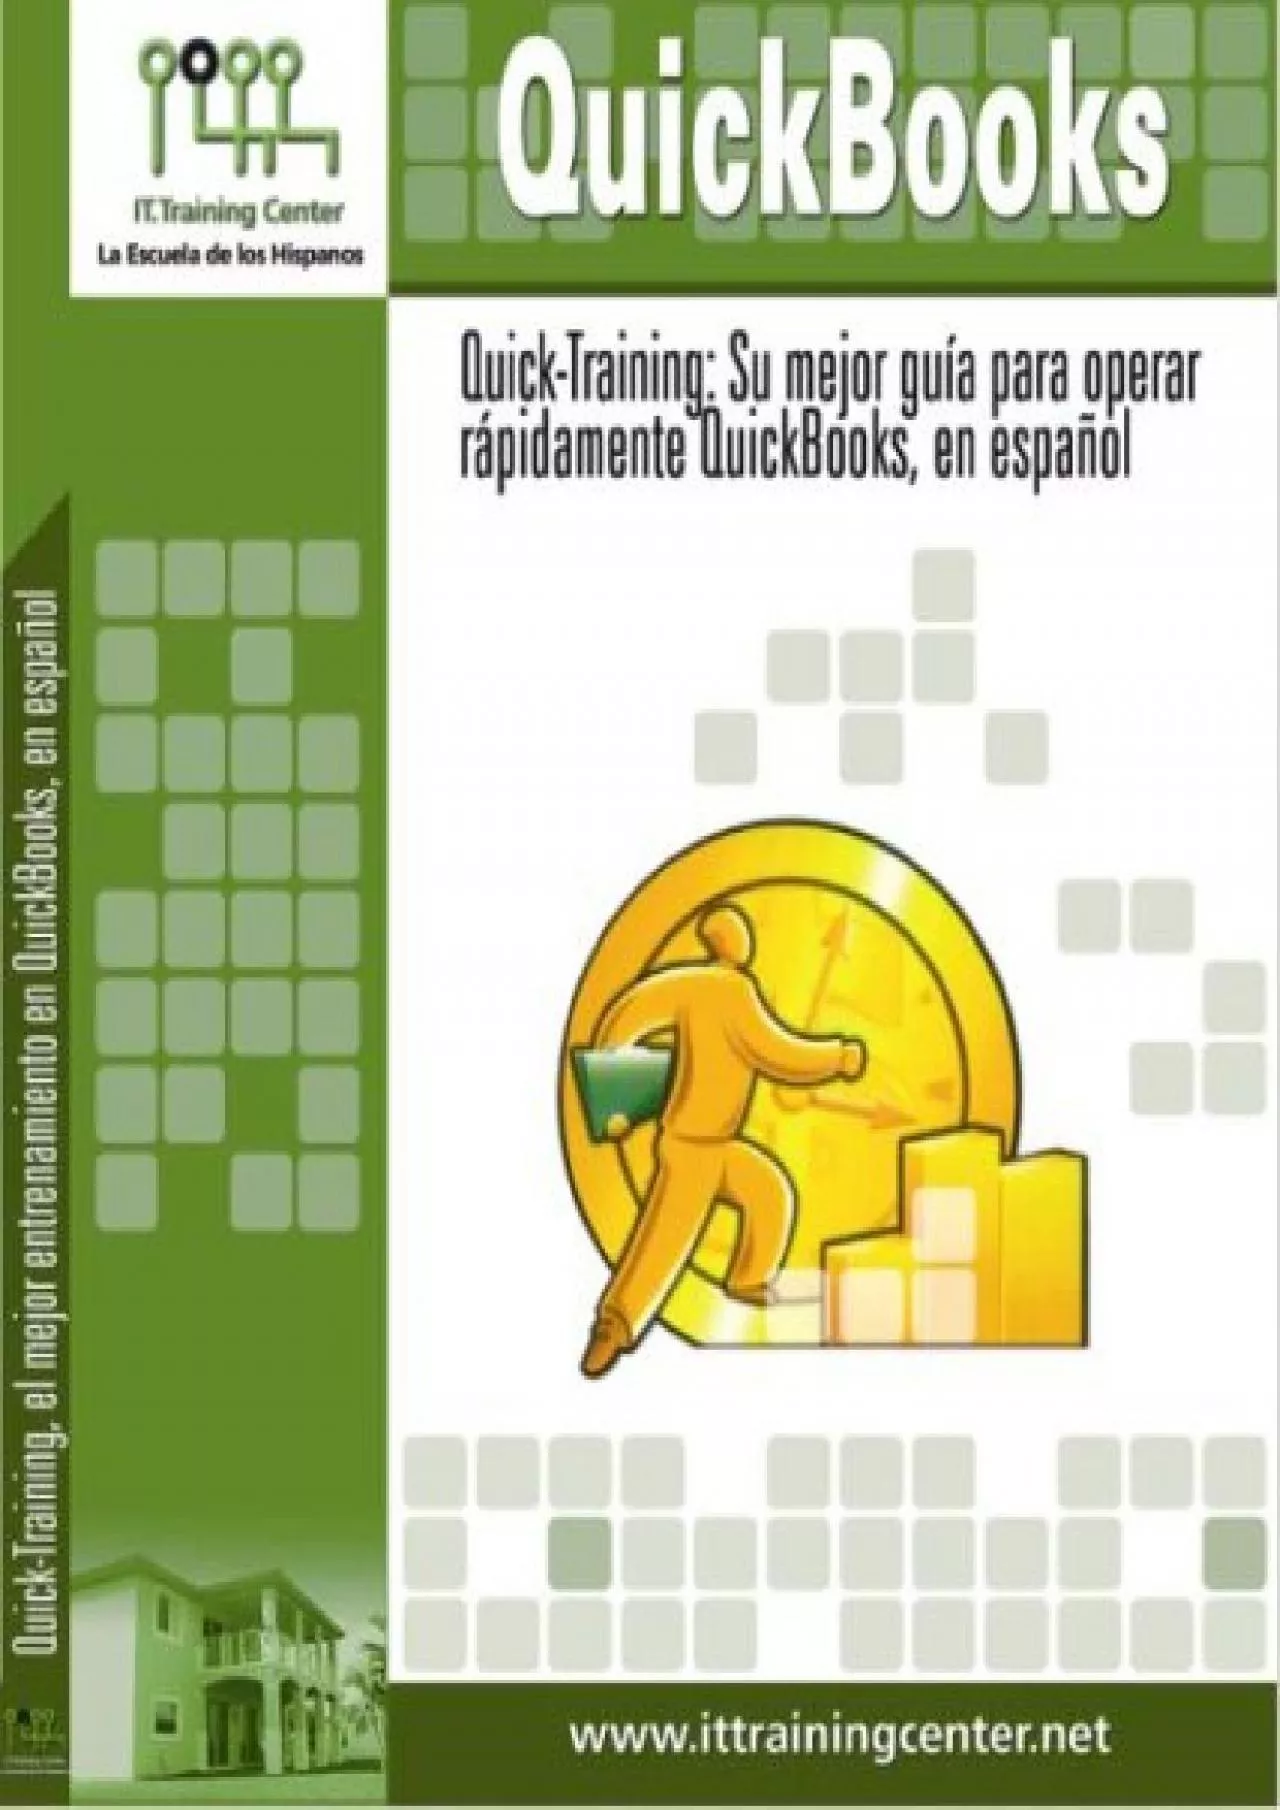 (DOWNLOAD)-QuickBooks Quick-Training (All You Need to Know About QuickBooks in Spanish